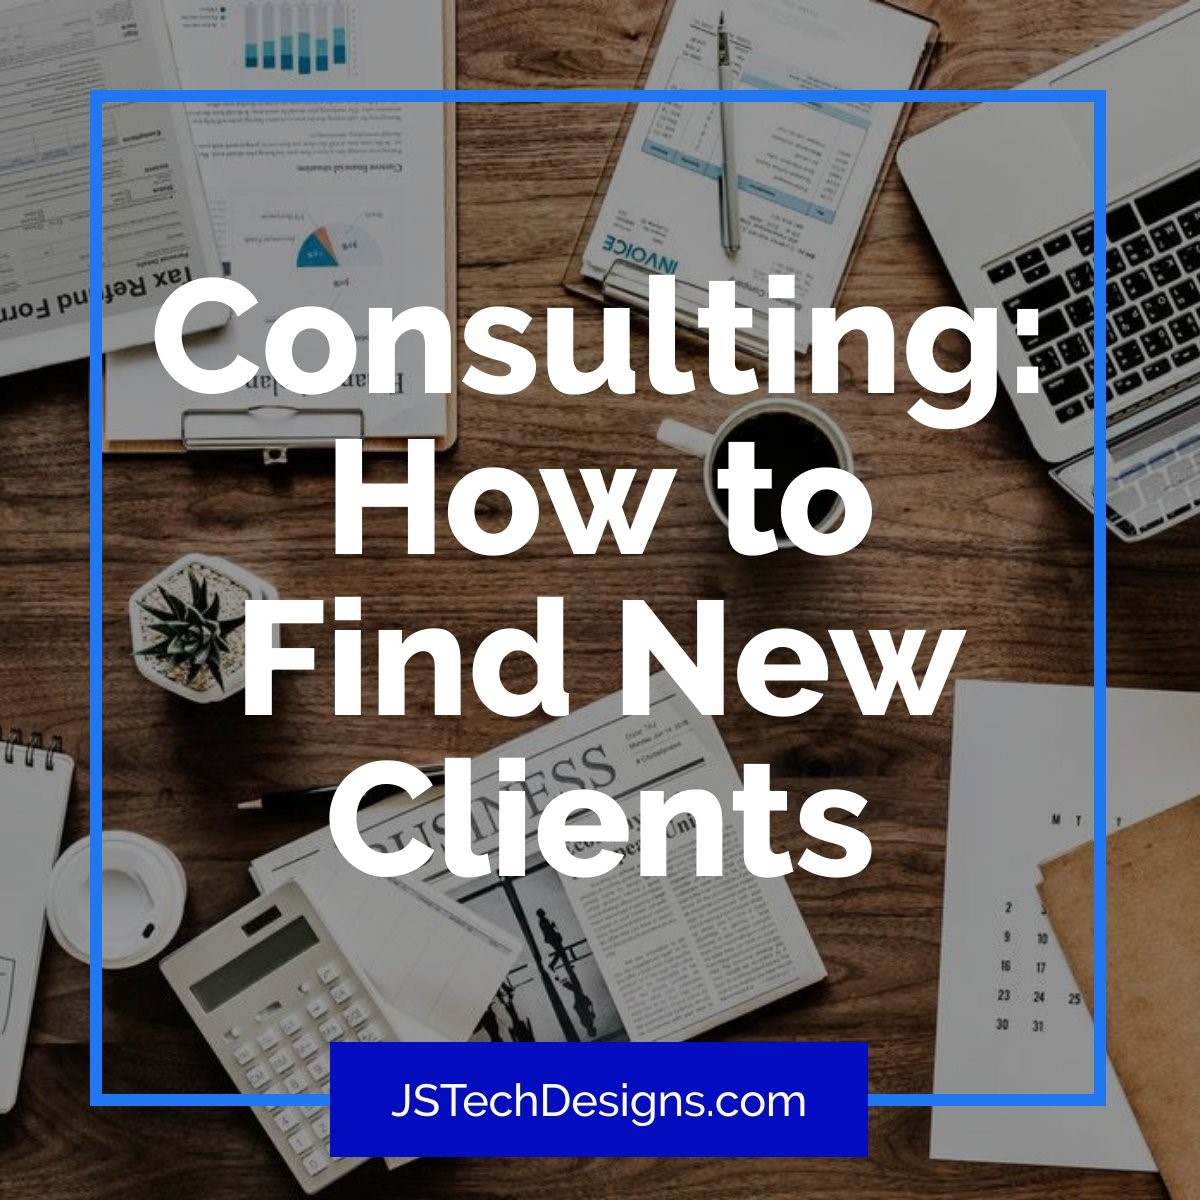 Consulting: How to Find New Clients